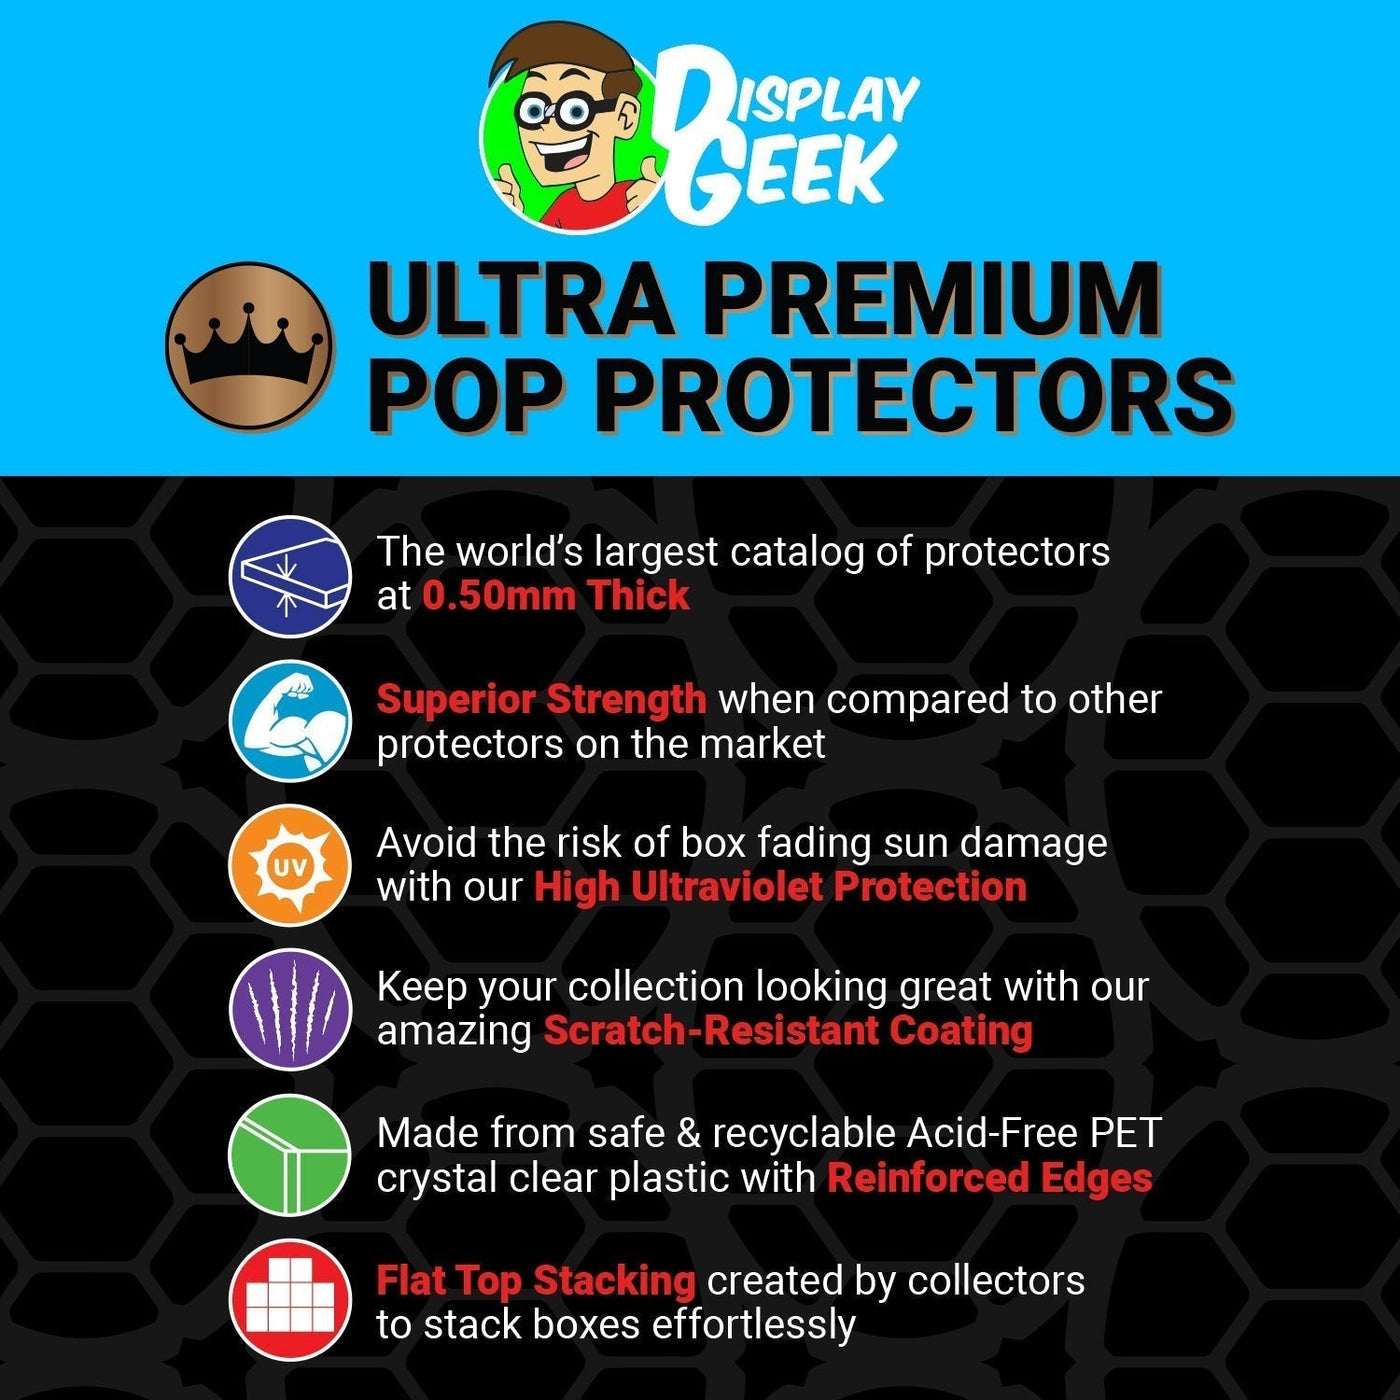 Pop Protector for 6 inch Fatgum HLB Baseball #1332 Super Size Funko Pop on The Protector Guide App by Display Geek